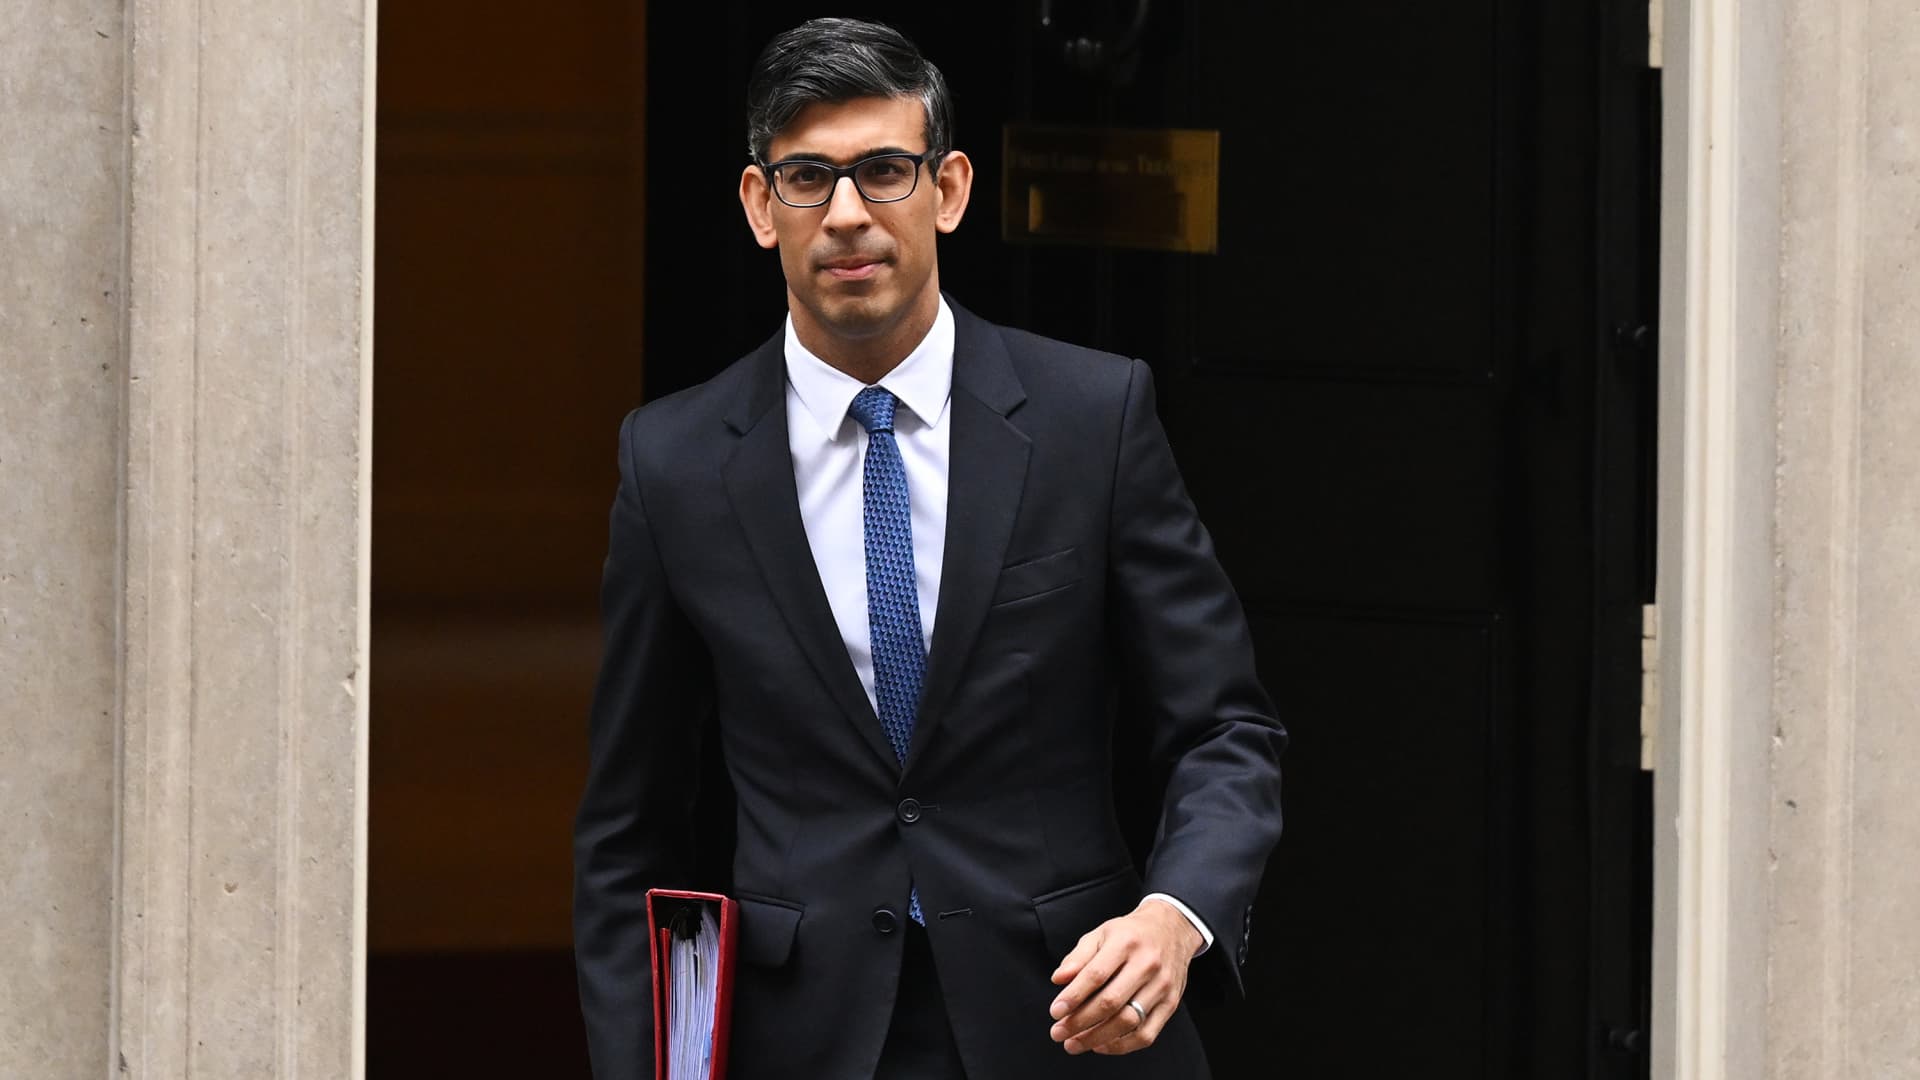 UK PM Rishi Sunak overhauls government departments after bumpy 100 days in power - CNBC : U.K. Prime Minister Rishi Sunak announced a mini overhaul of his government as he seeks to reassert his authority after a shaky first 100 days in office.  | Tranquility 國際社群